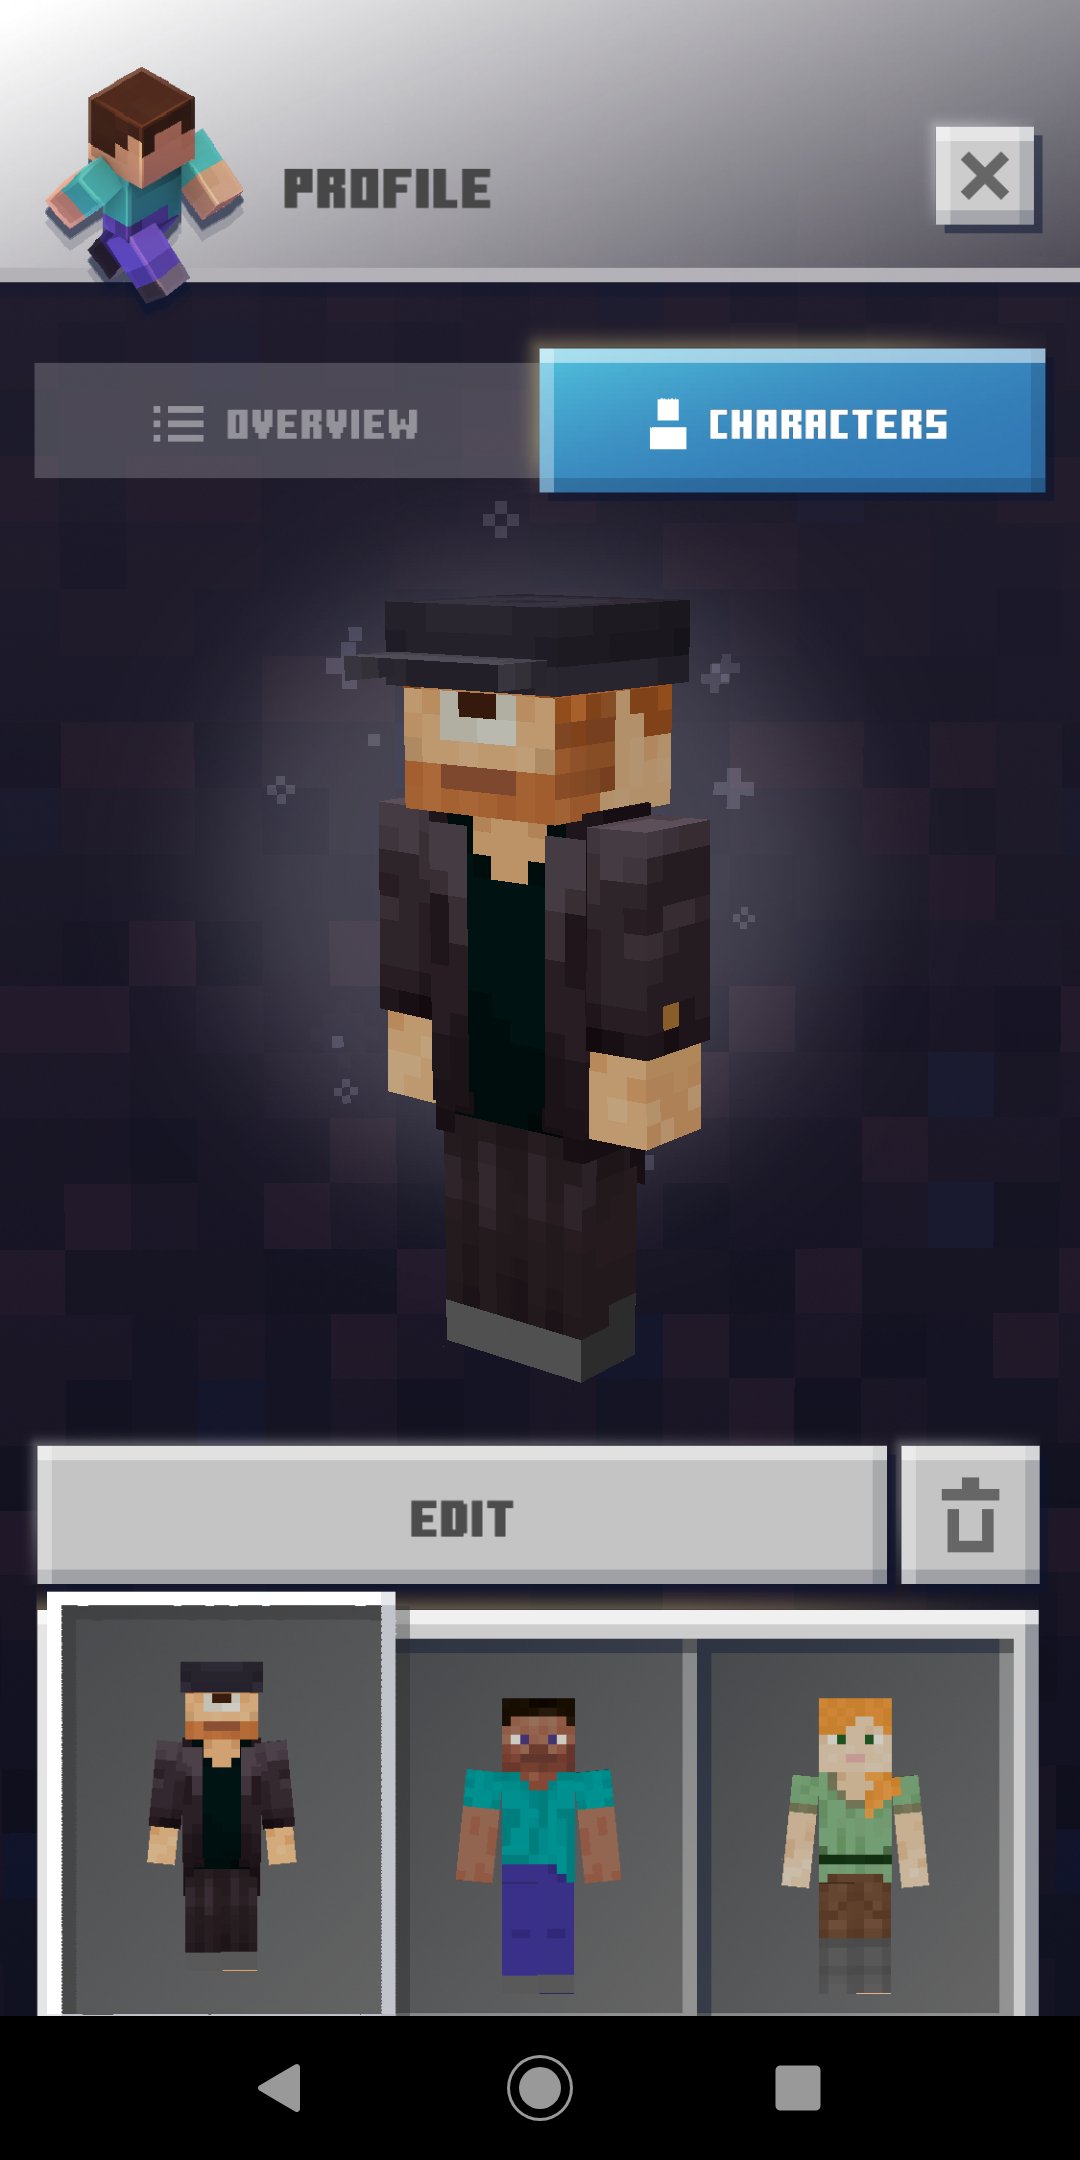 Wide Brim hats/fedoras on Minecraft skins - Skins - Mapping and